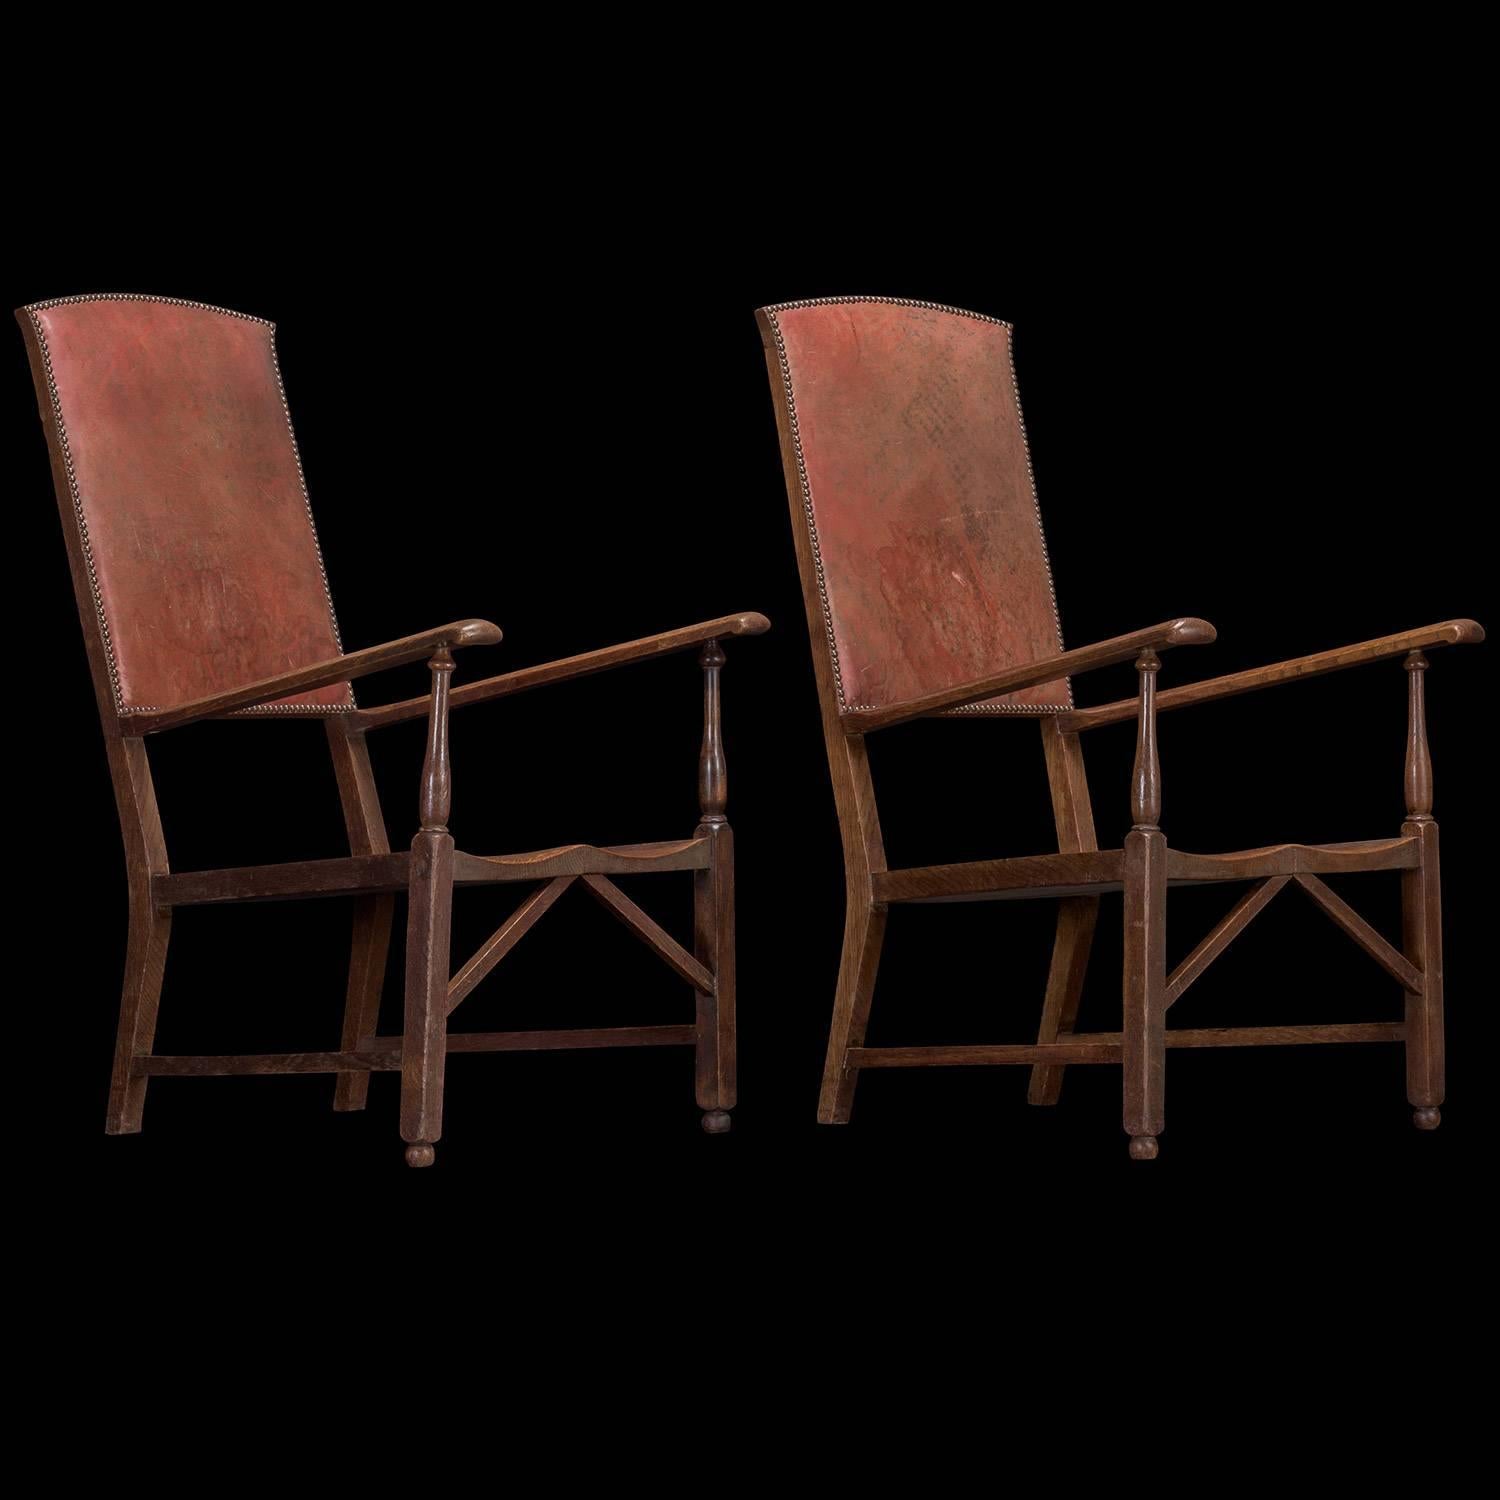 Pair of Oak and Leather Armchairs, from England circa 1900.

Edwardian armchairs featuring solid oak construction with unique architectural form. Each chair has a moulded oak seat, with original leather upholstery on the back fitted with brass